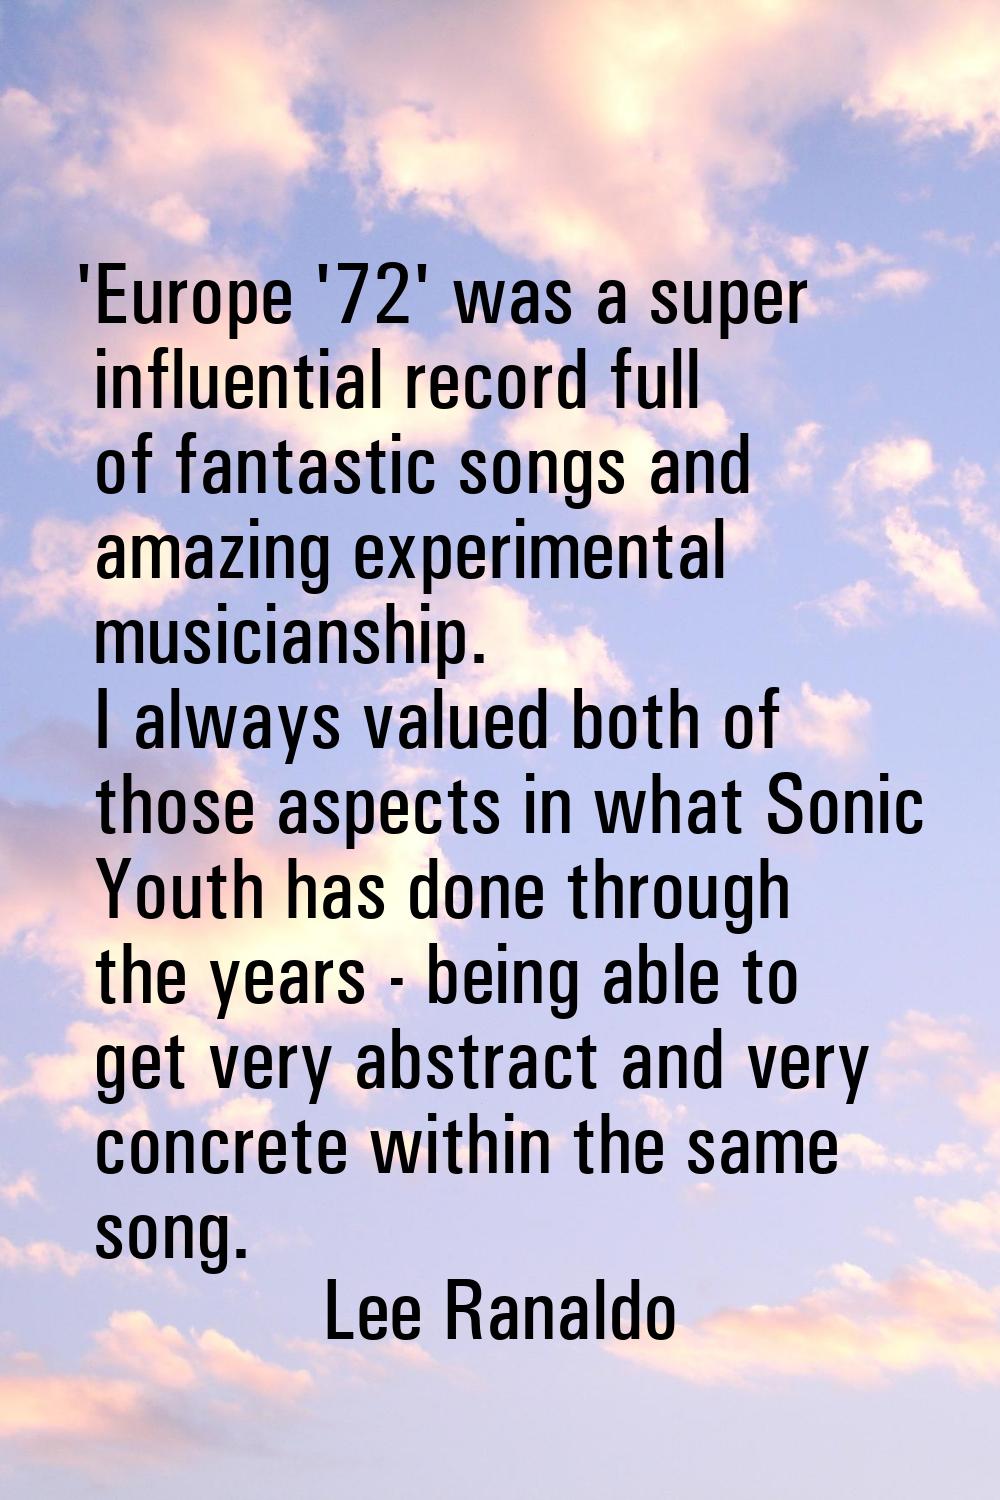 'Europe '72' was a super influential record full of fantastic songs and amazing experimental musici